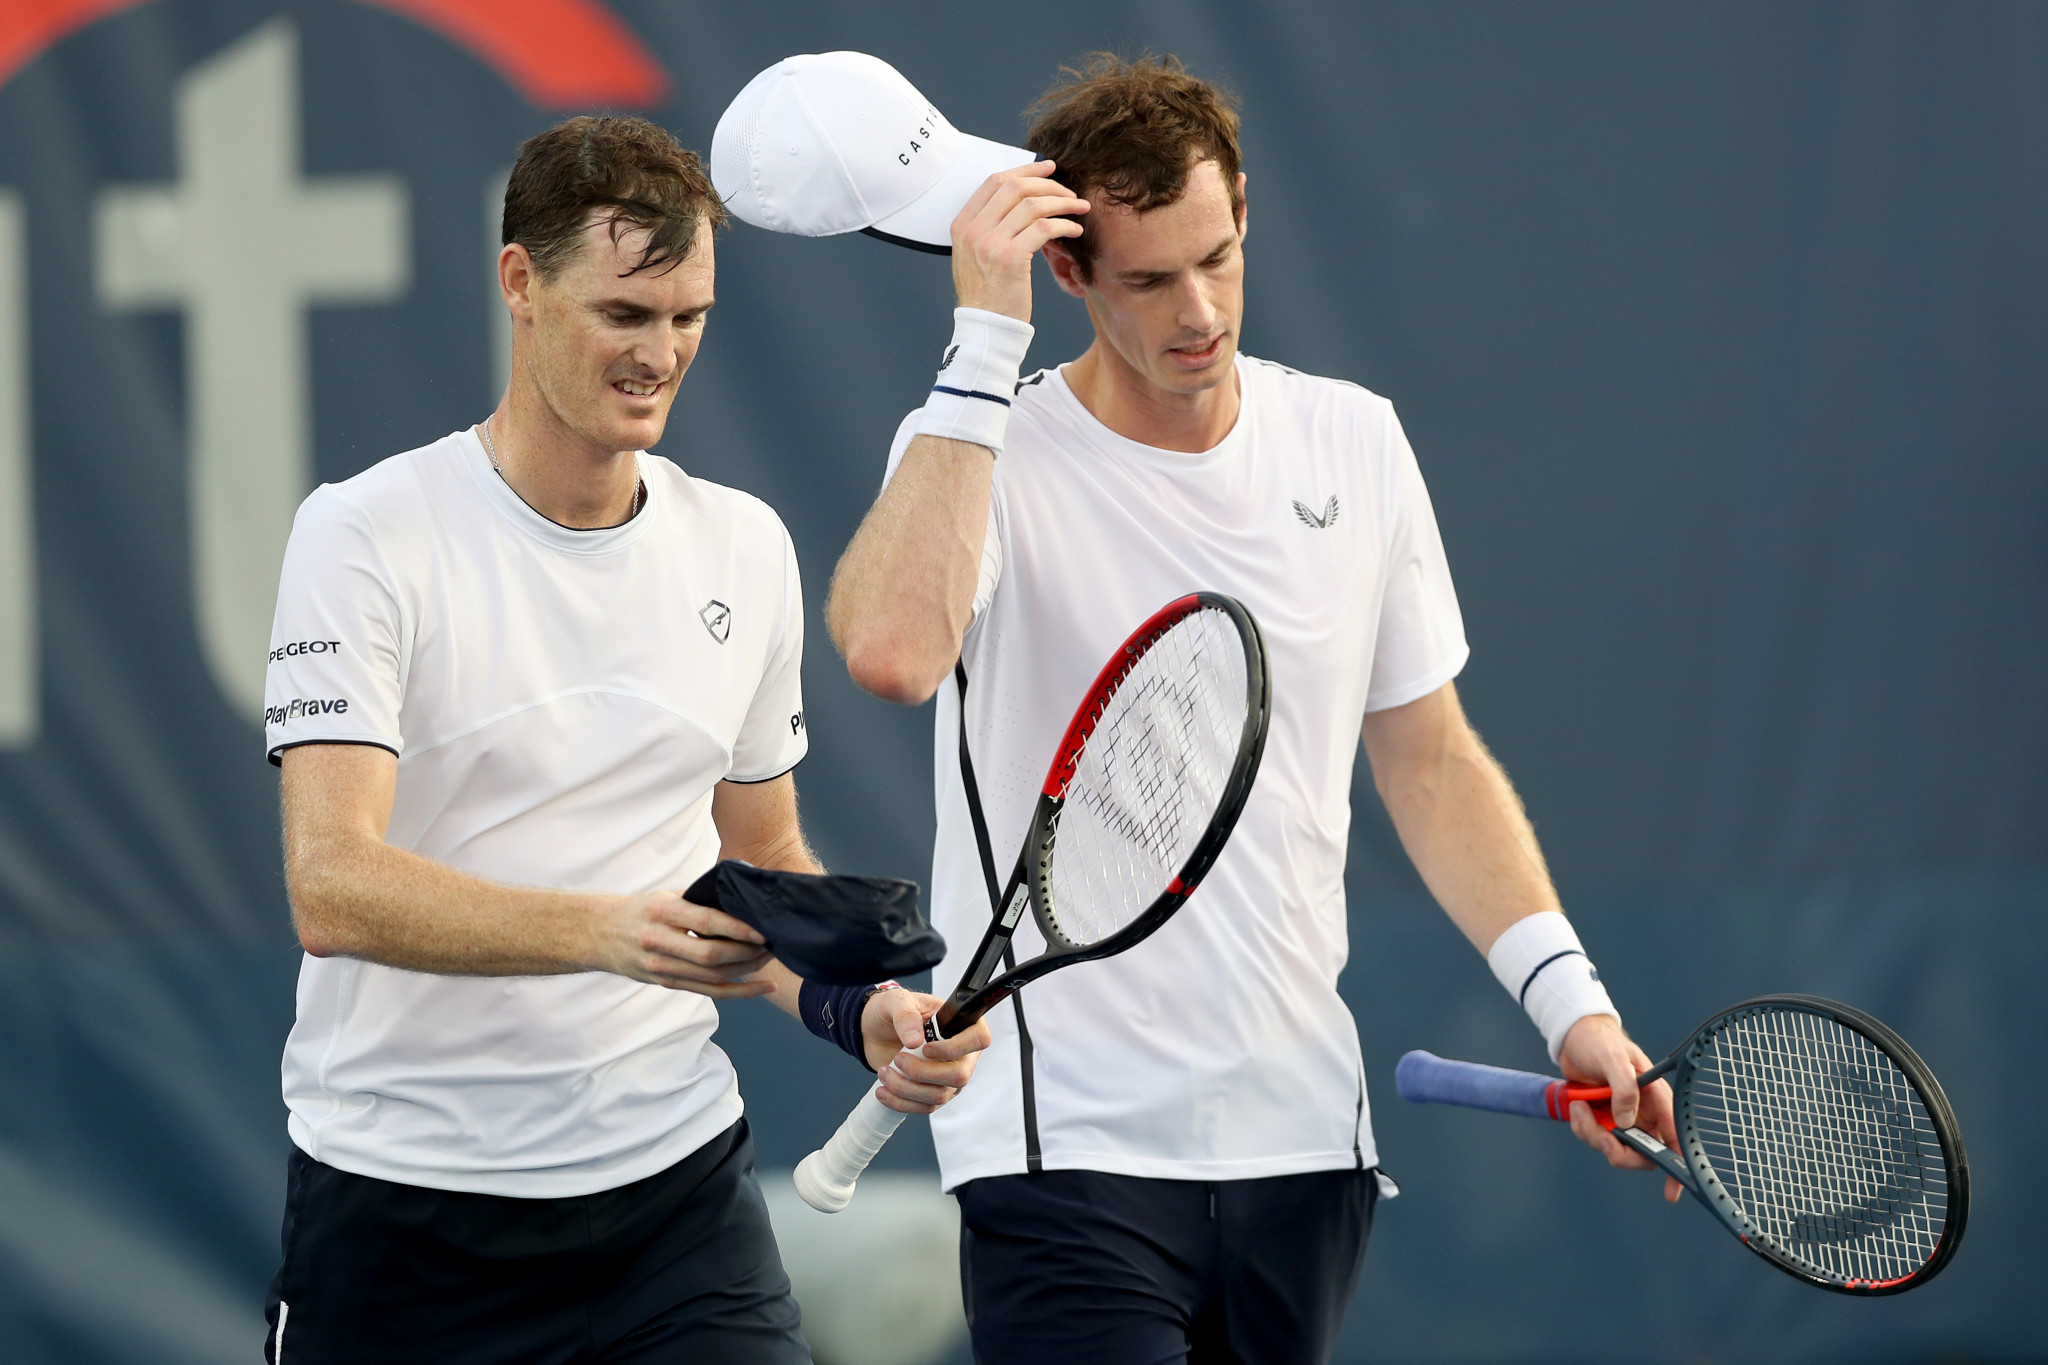 The Murray brothers may not compete together at Tokyo 2020 ©Getty Images